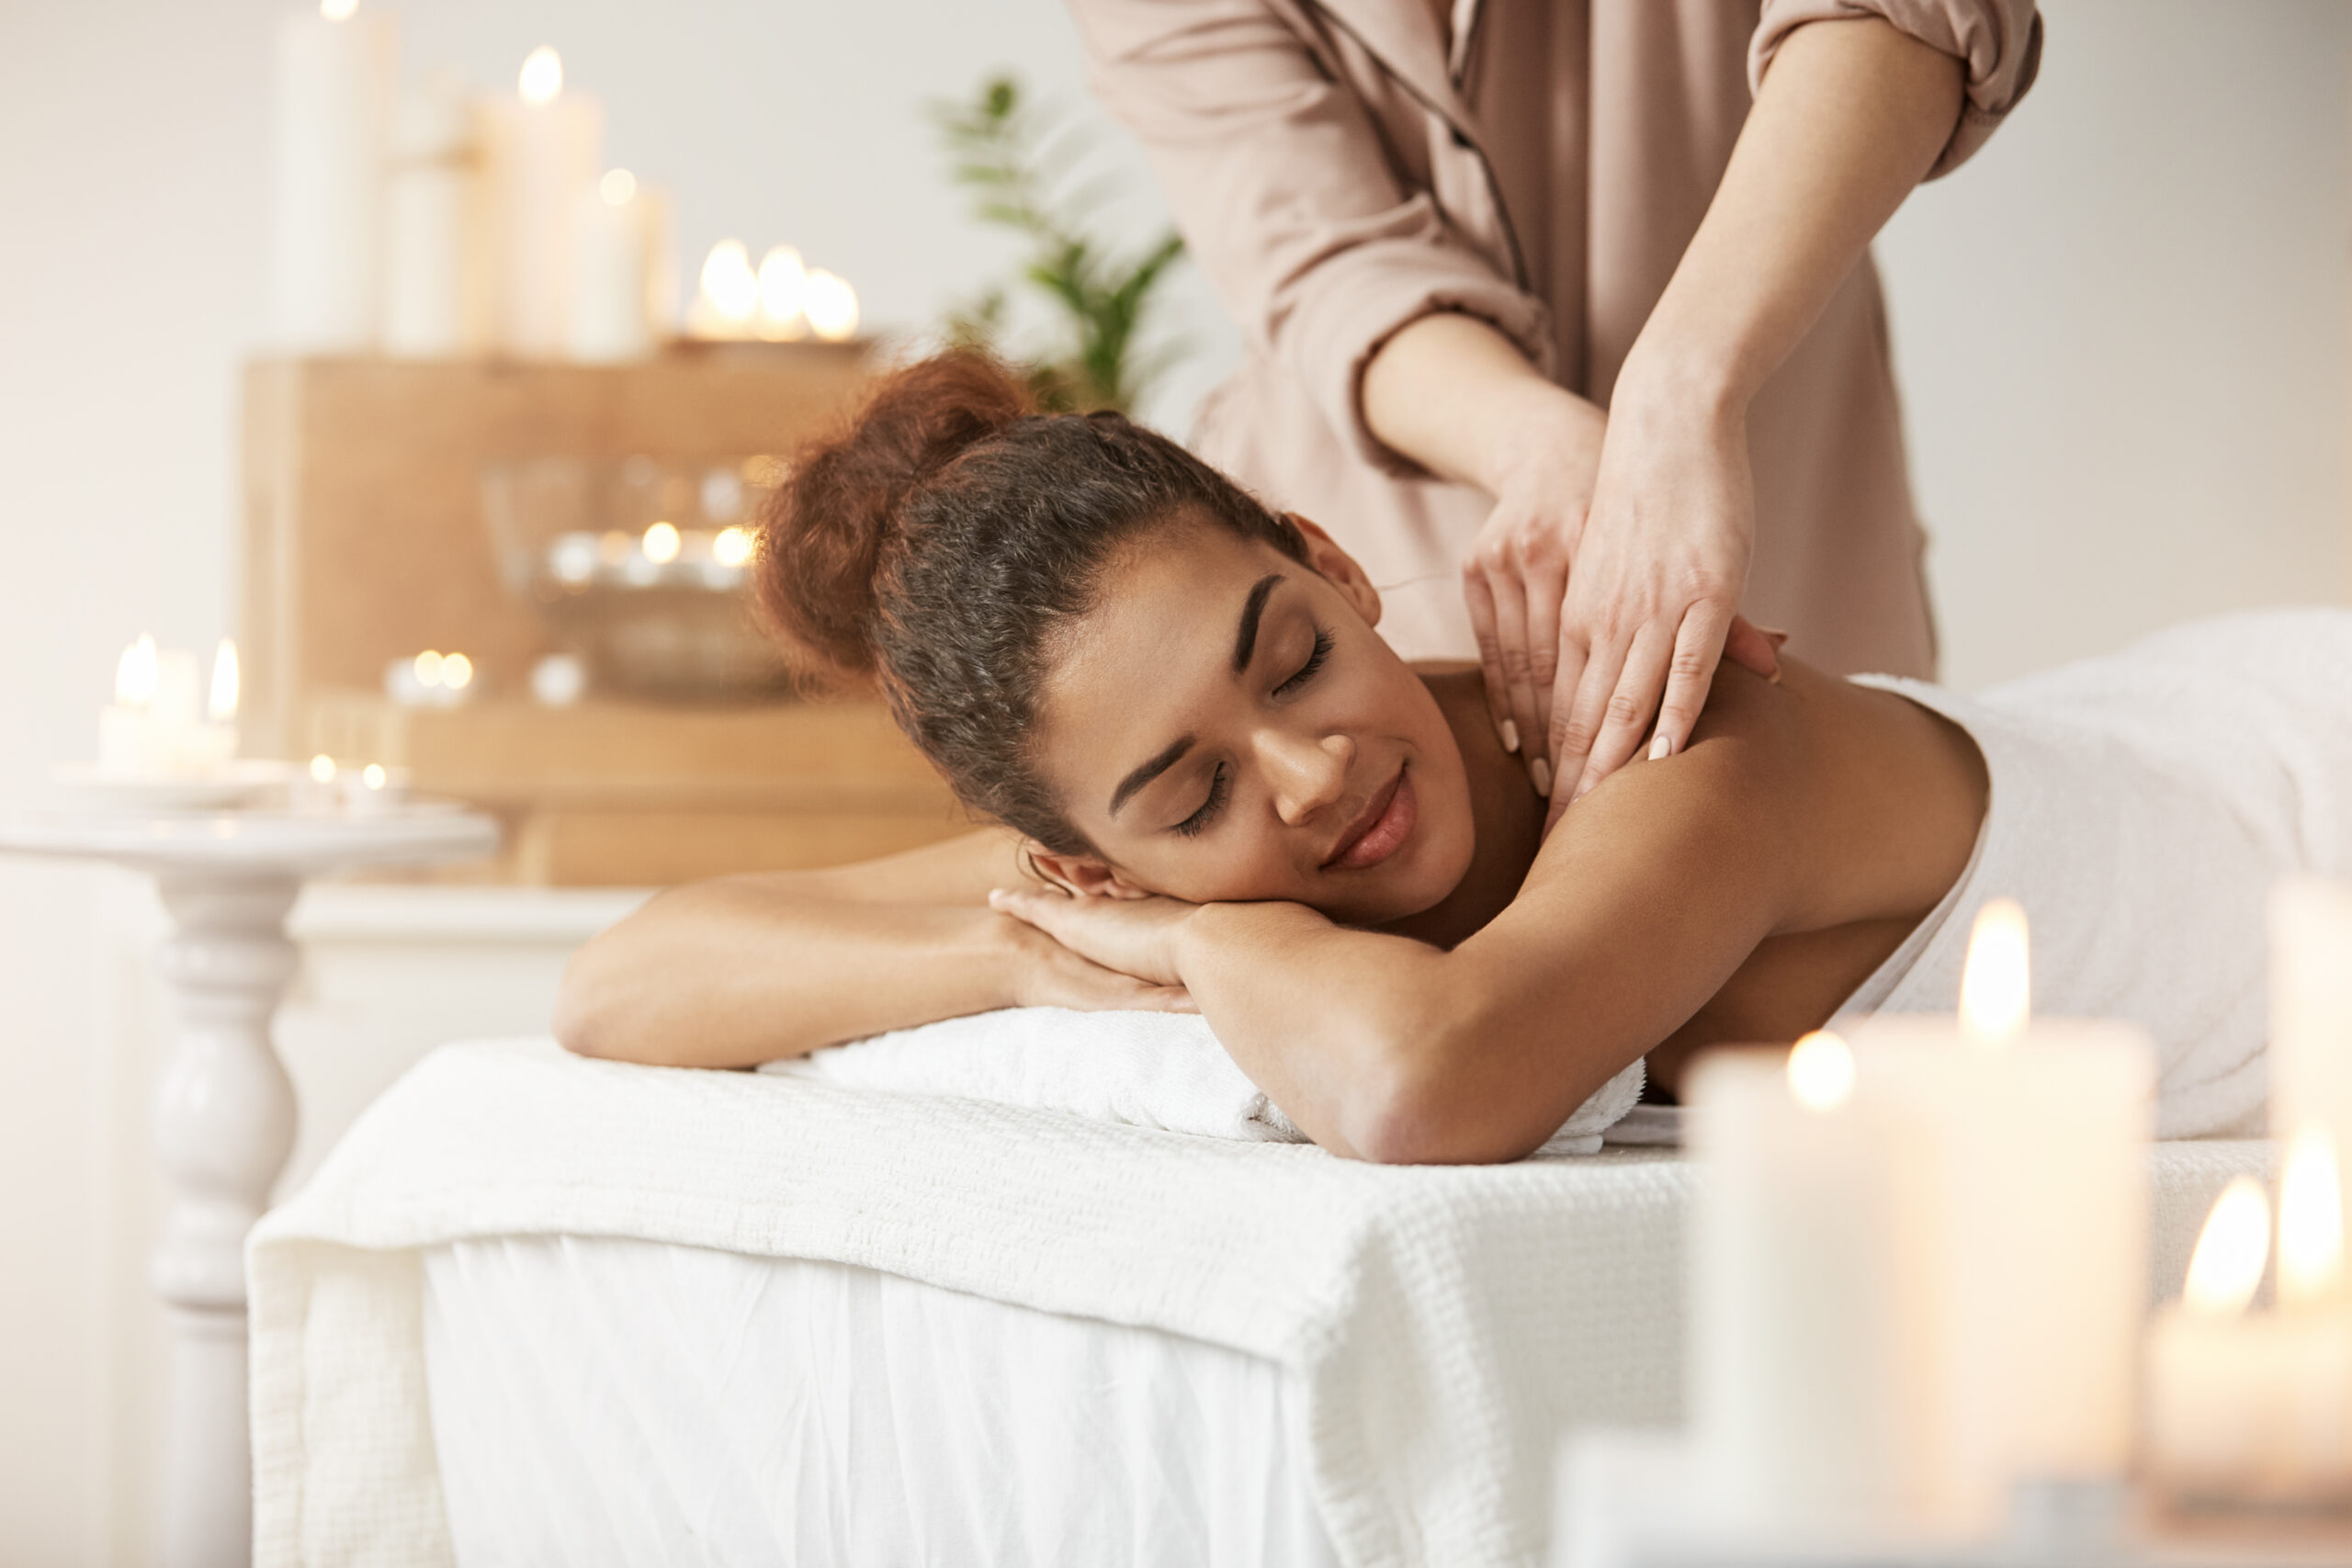 tender-african-woman-smiling-enjoying-massage-with-closed-eyes-in-spa-resort-scaled-1.jpg